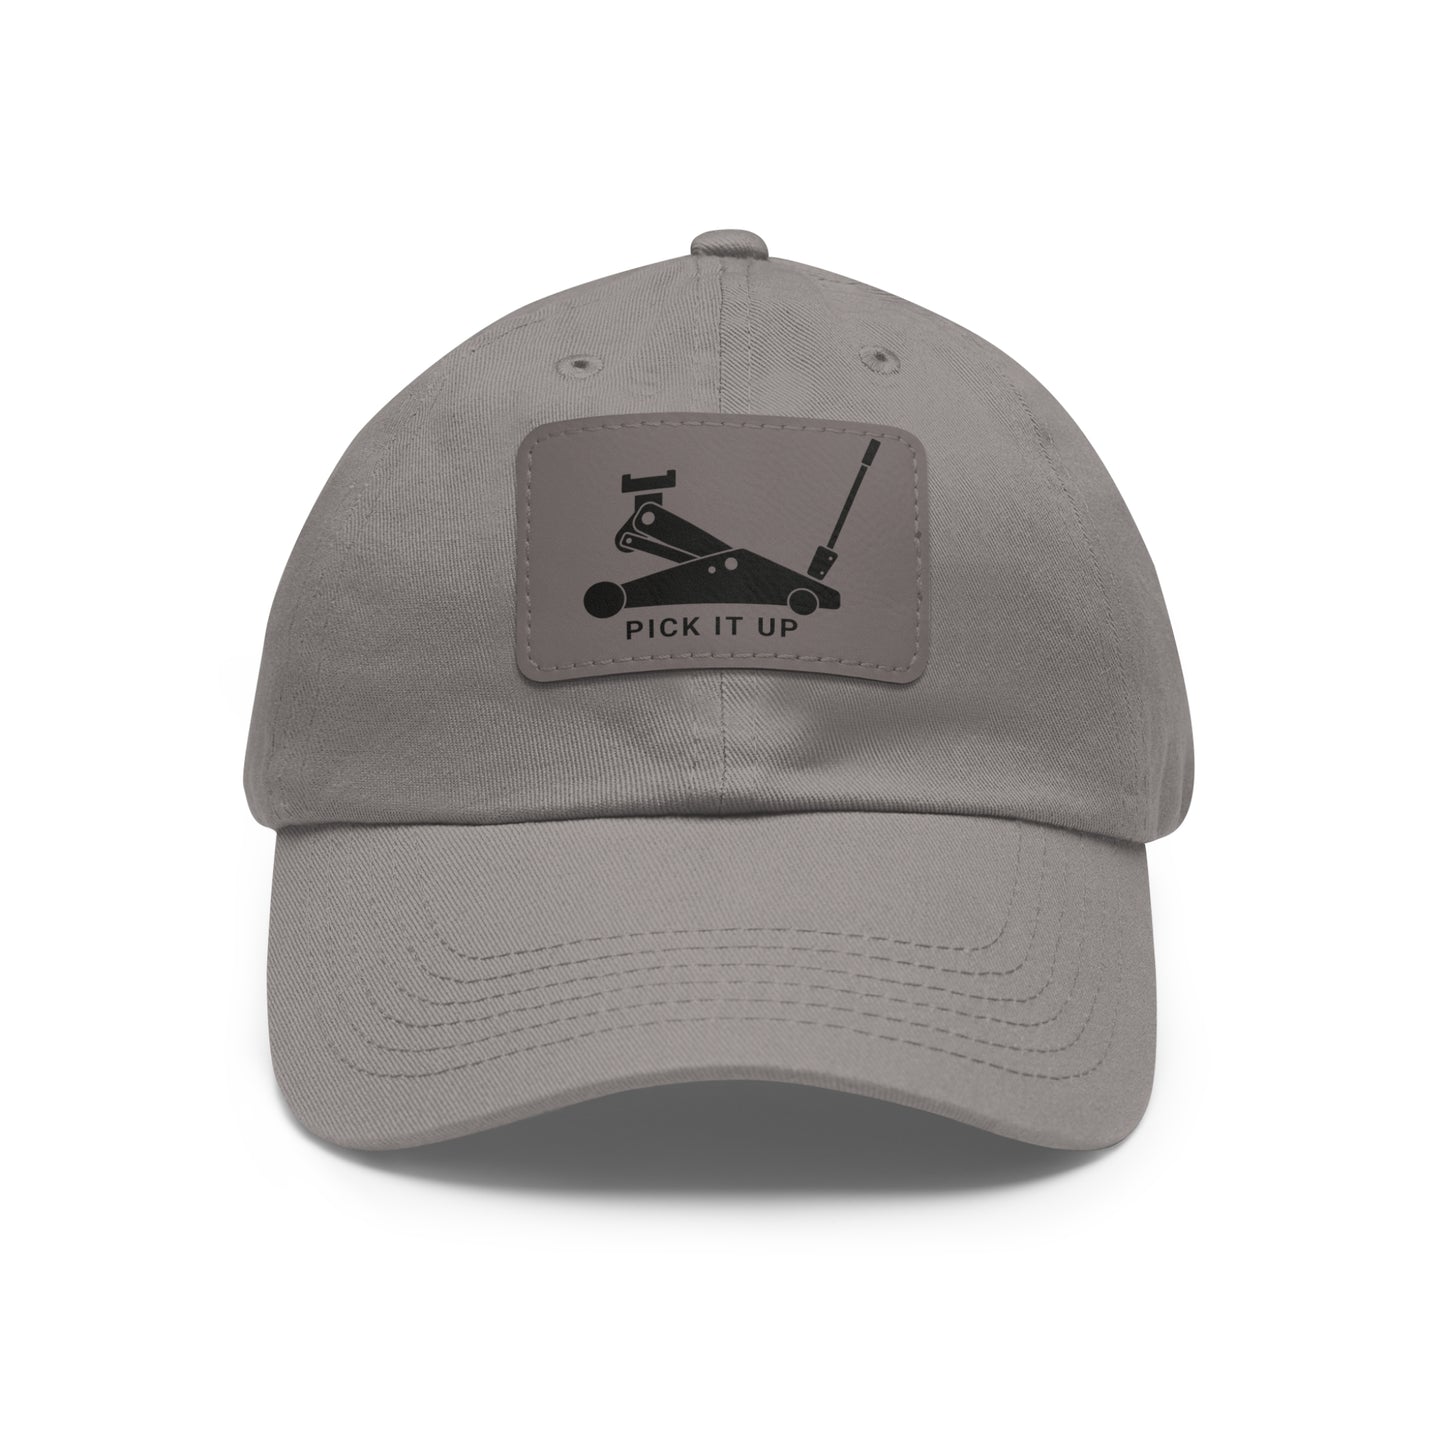 "Pick it up" Dad Hat with Leather Patch